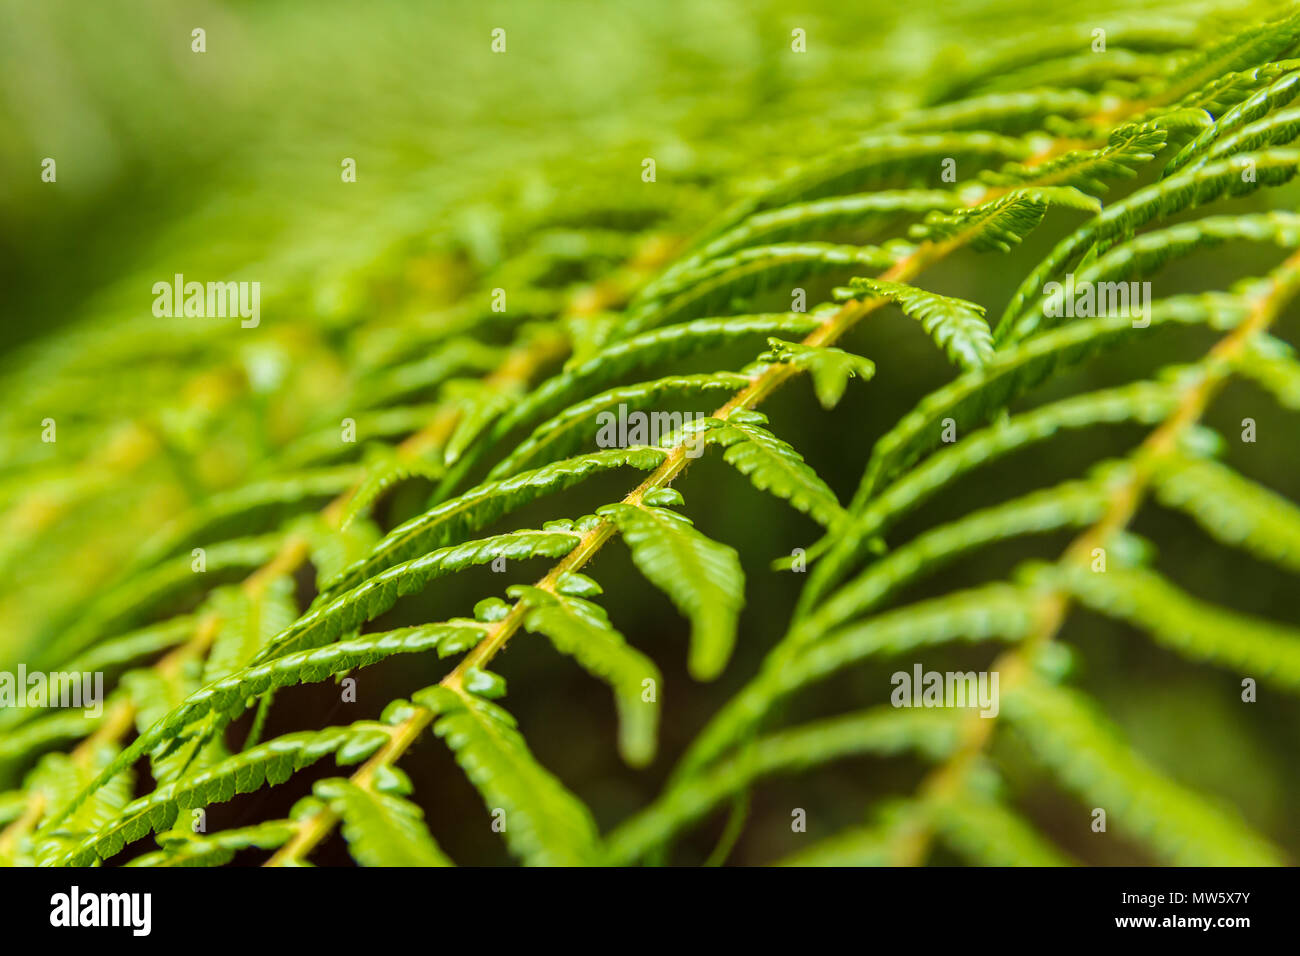 tree fern frond pattern abstract, background texture Stock Photo